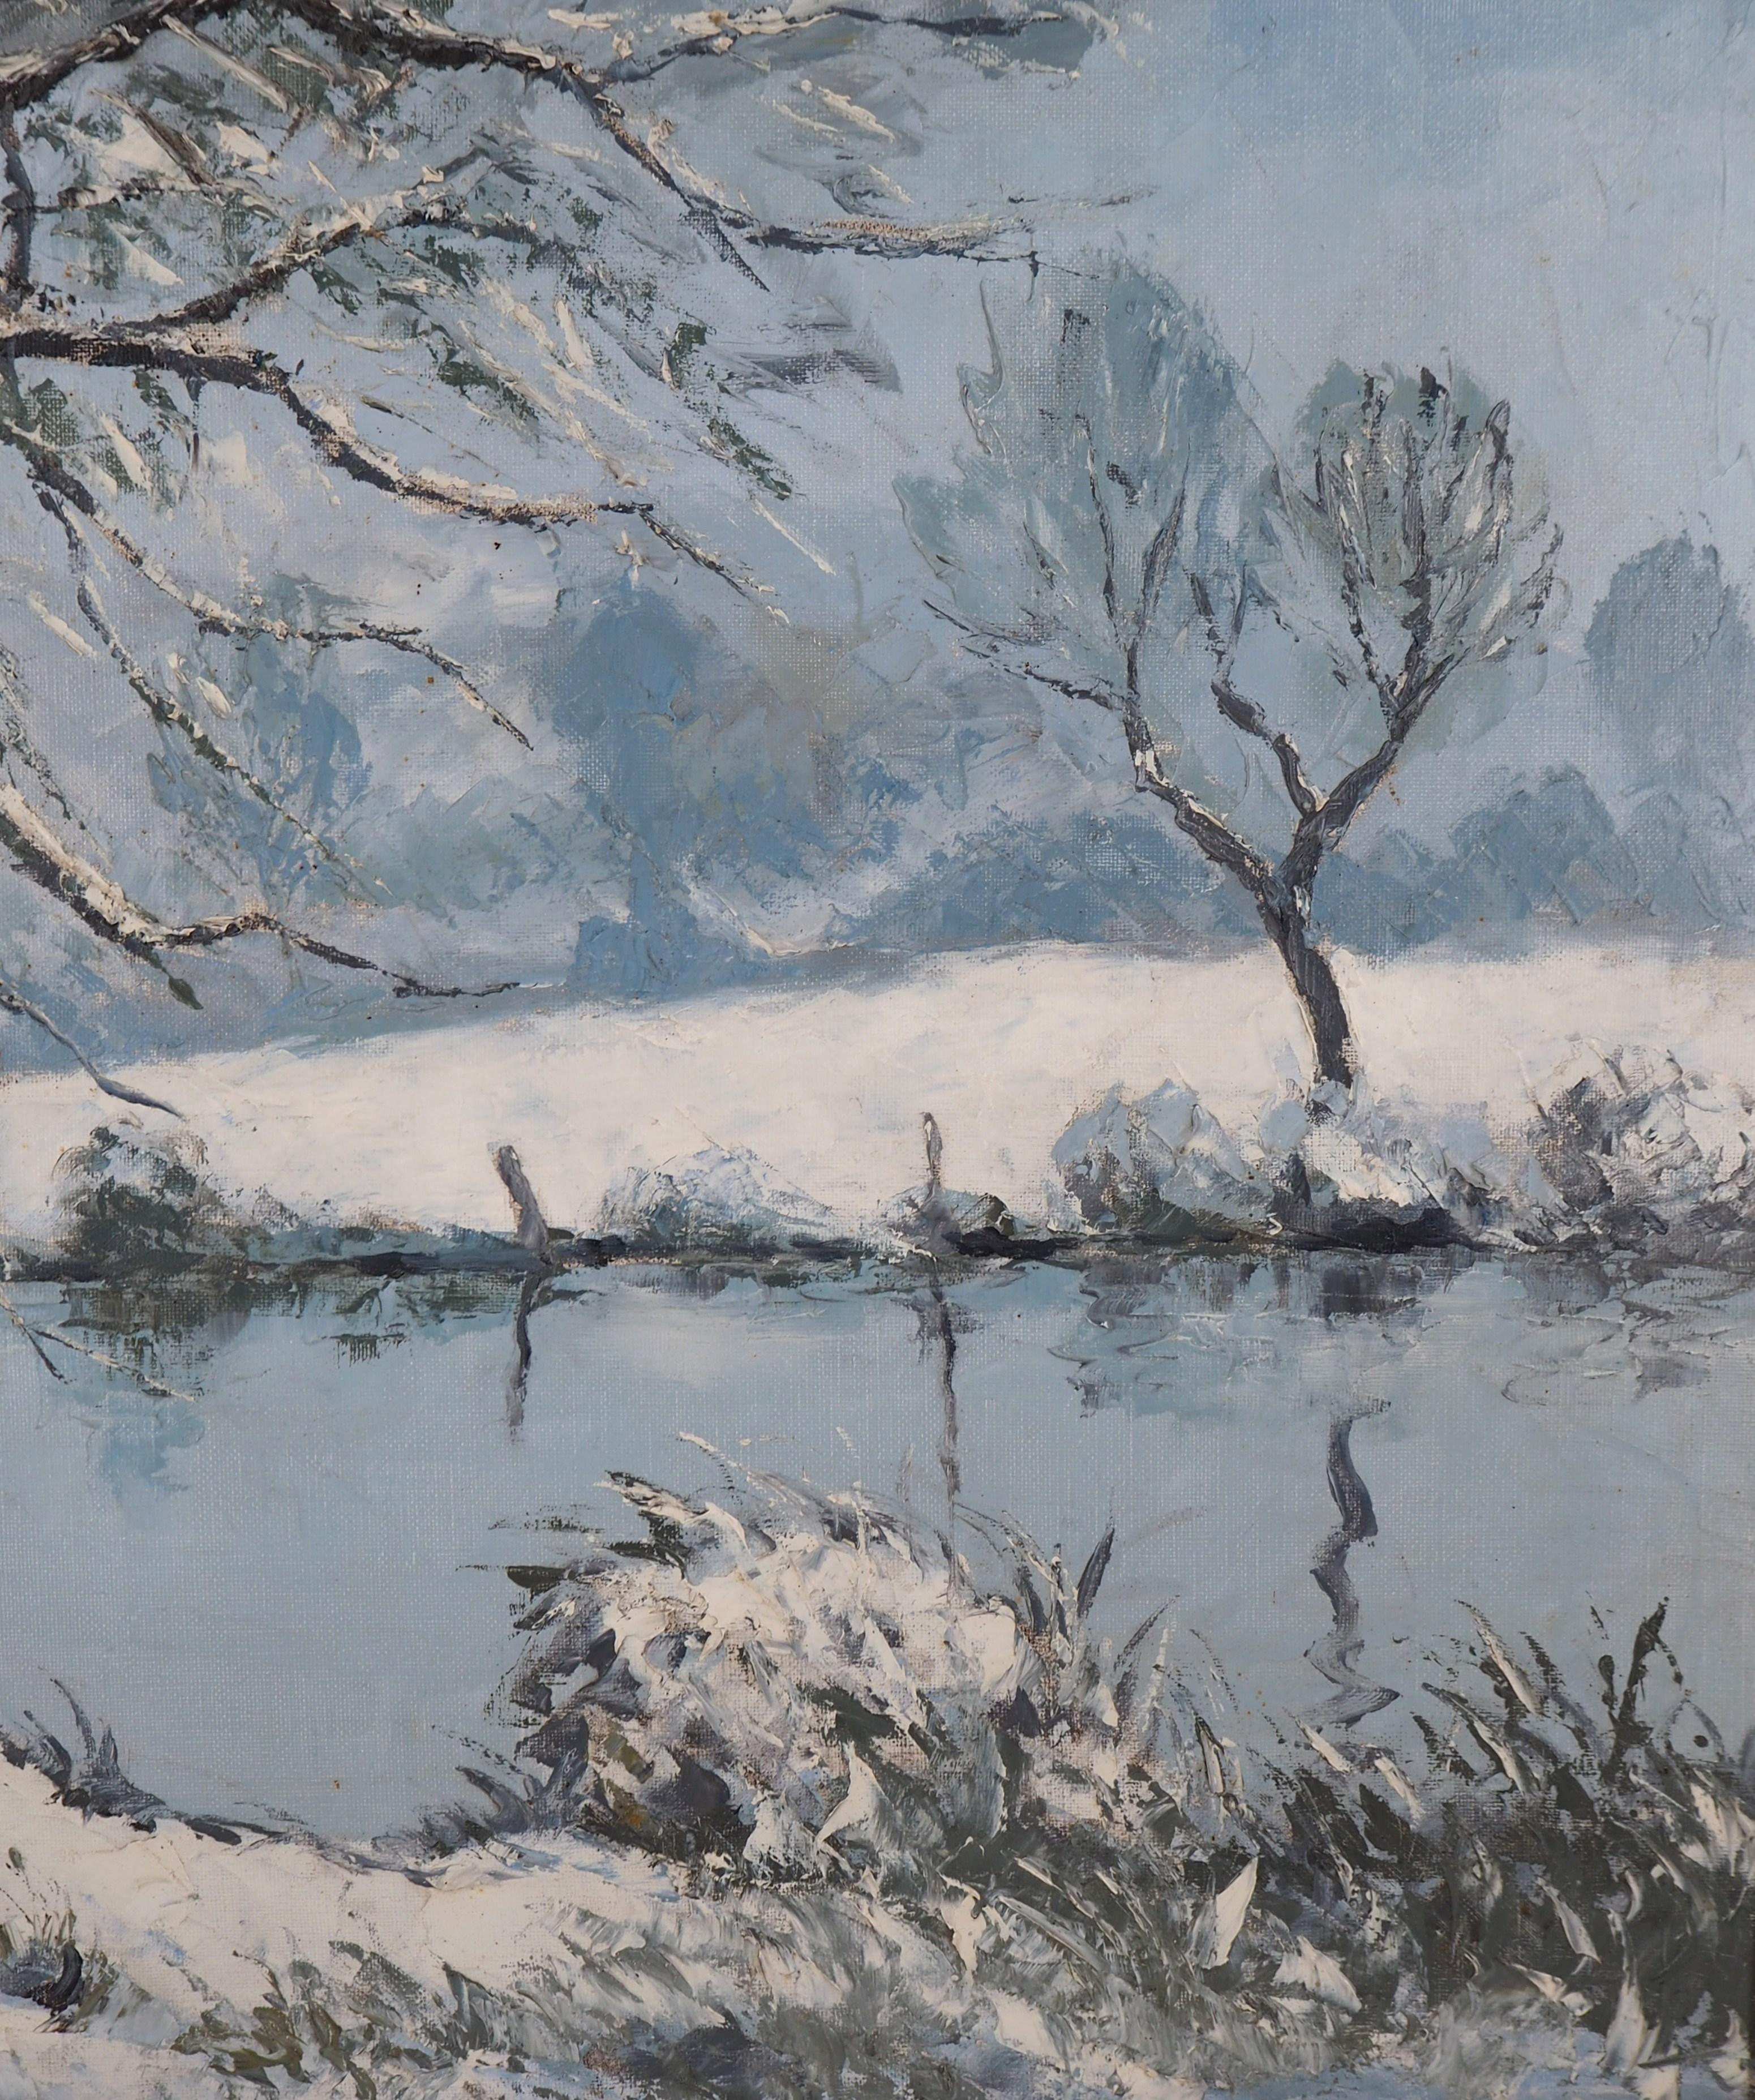 Normandy : Frozen Lake and Snow - Original oil on canvas, Handsigned - Gray Landscape Painting by Paul Emile Pissarro